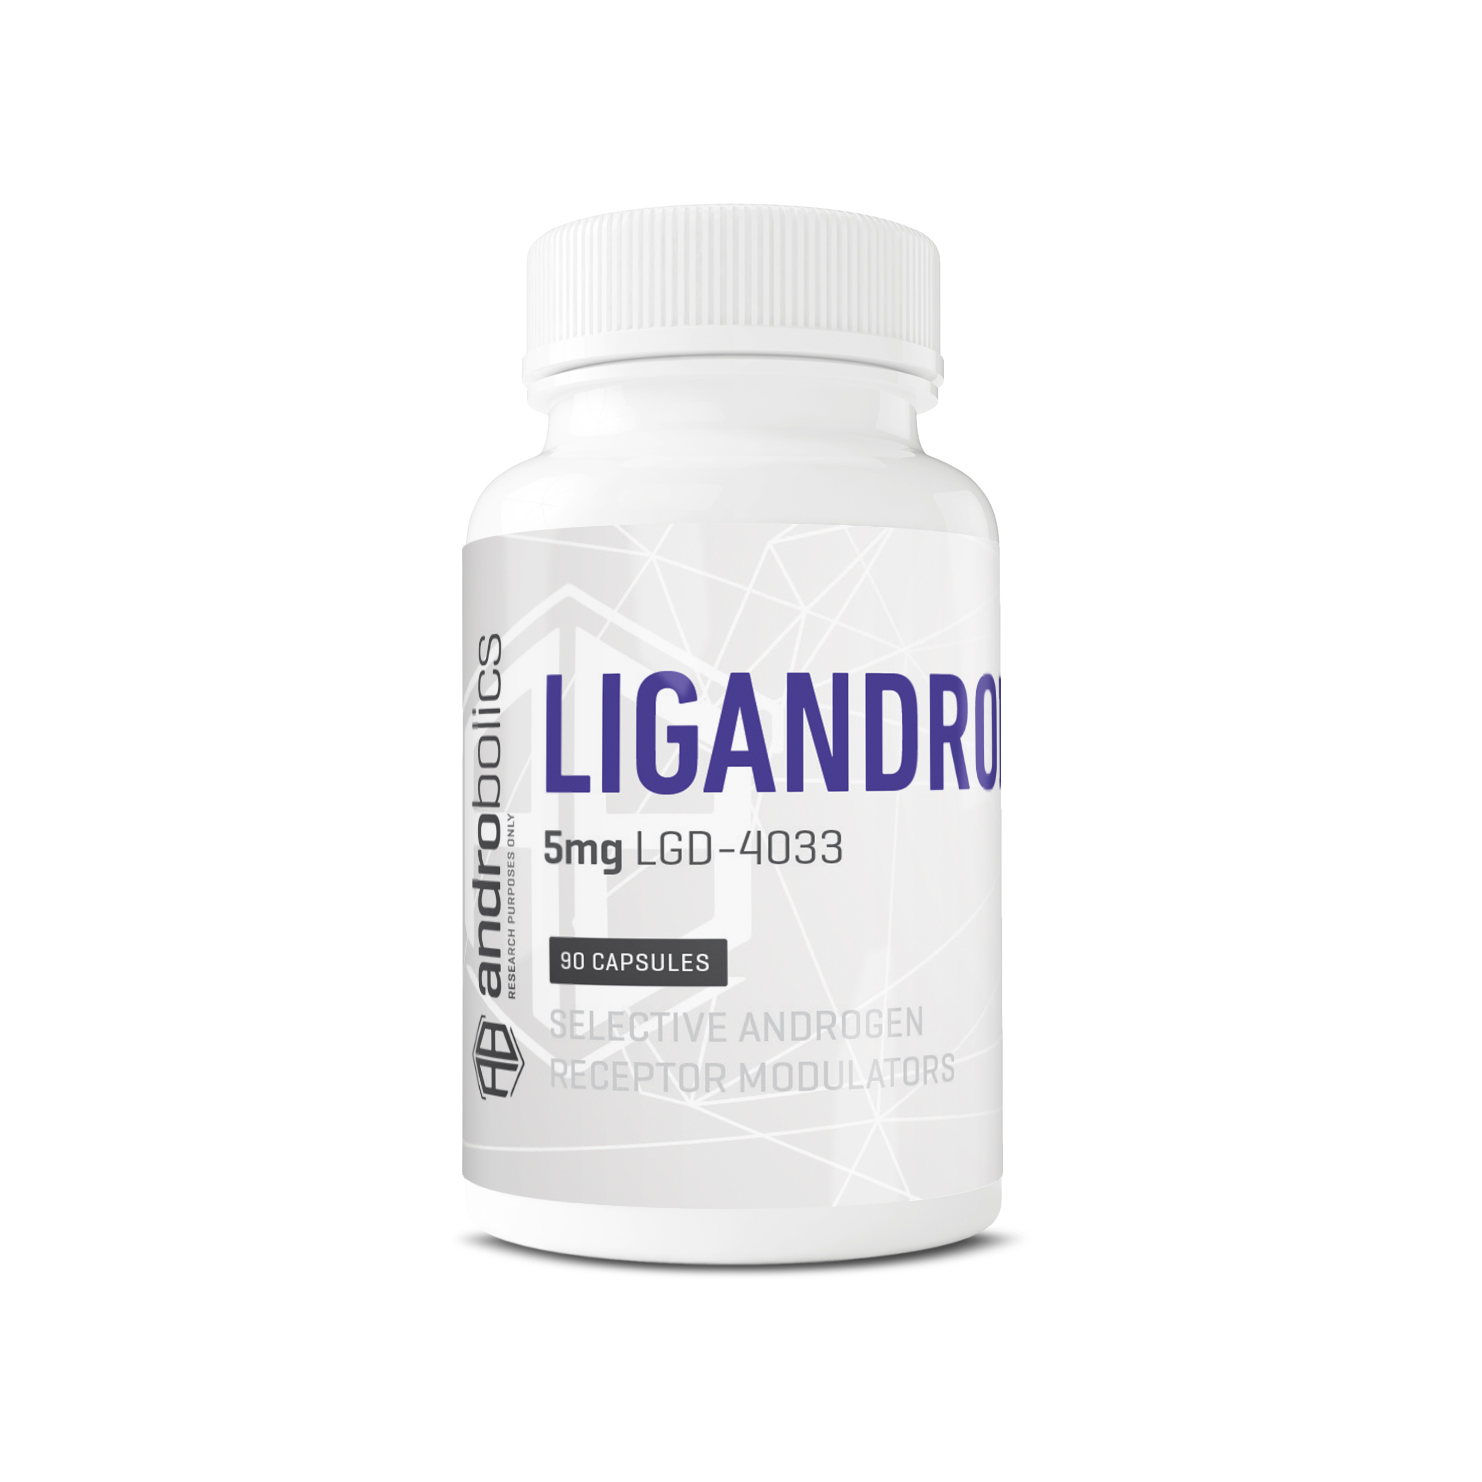 Ligandrol Canada - Bottle of Ligandrol LGD4033 with 90 capsules of 5mg